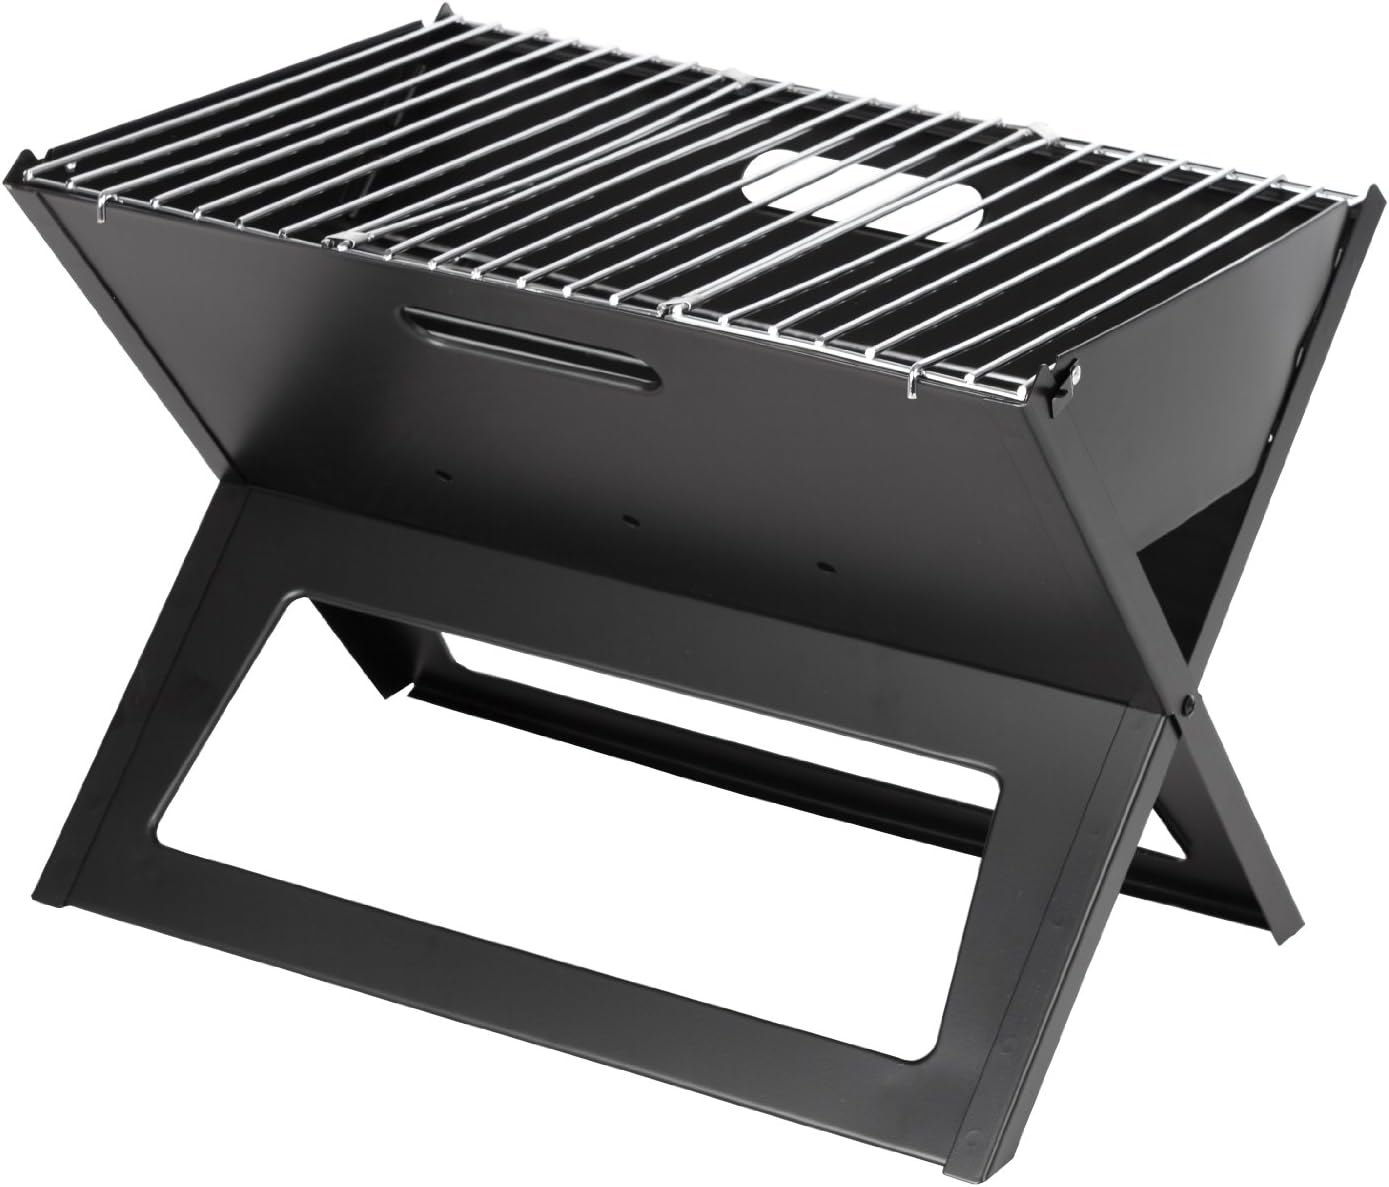 Fire Sense 60508 Notebook BBQ Grill 3.5mm Cooking Bars Instant Foldable  Easy Portability For Outdoor Barbecues Camping Traveling Picnics Garden Beach Party - Black